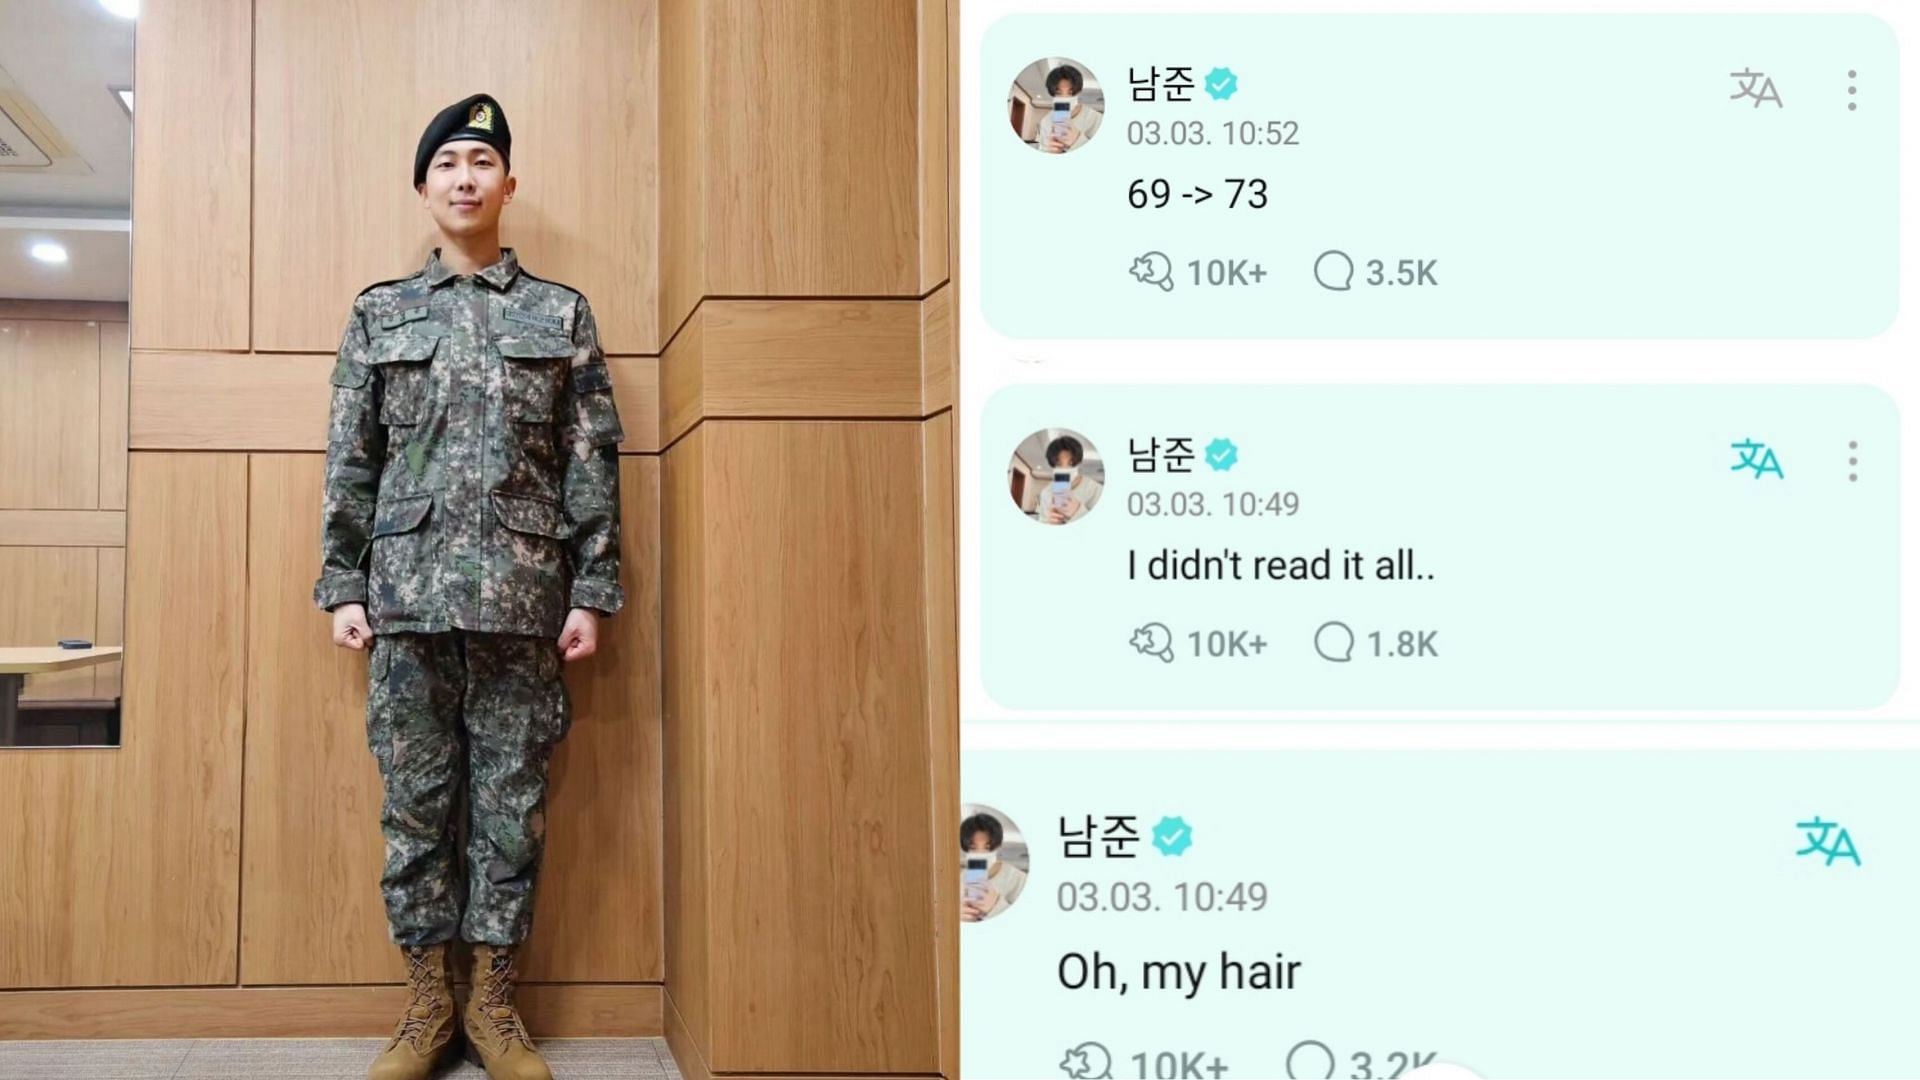 BTS Kim Namjoon chats with fans via the Weverse app (Images via Weverse and Instagram/@rkive)